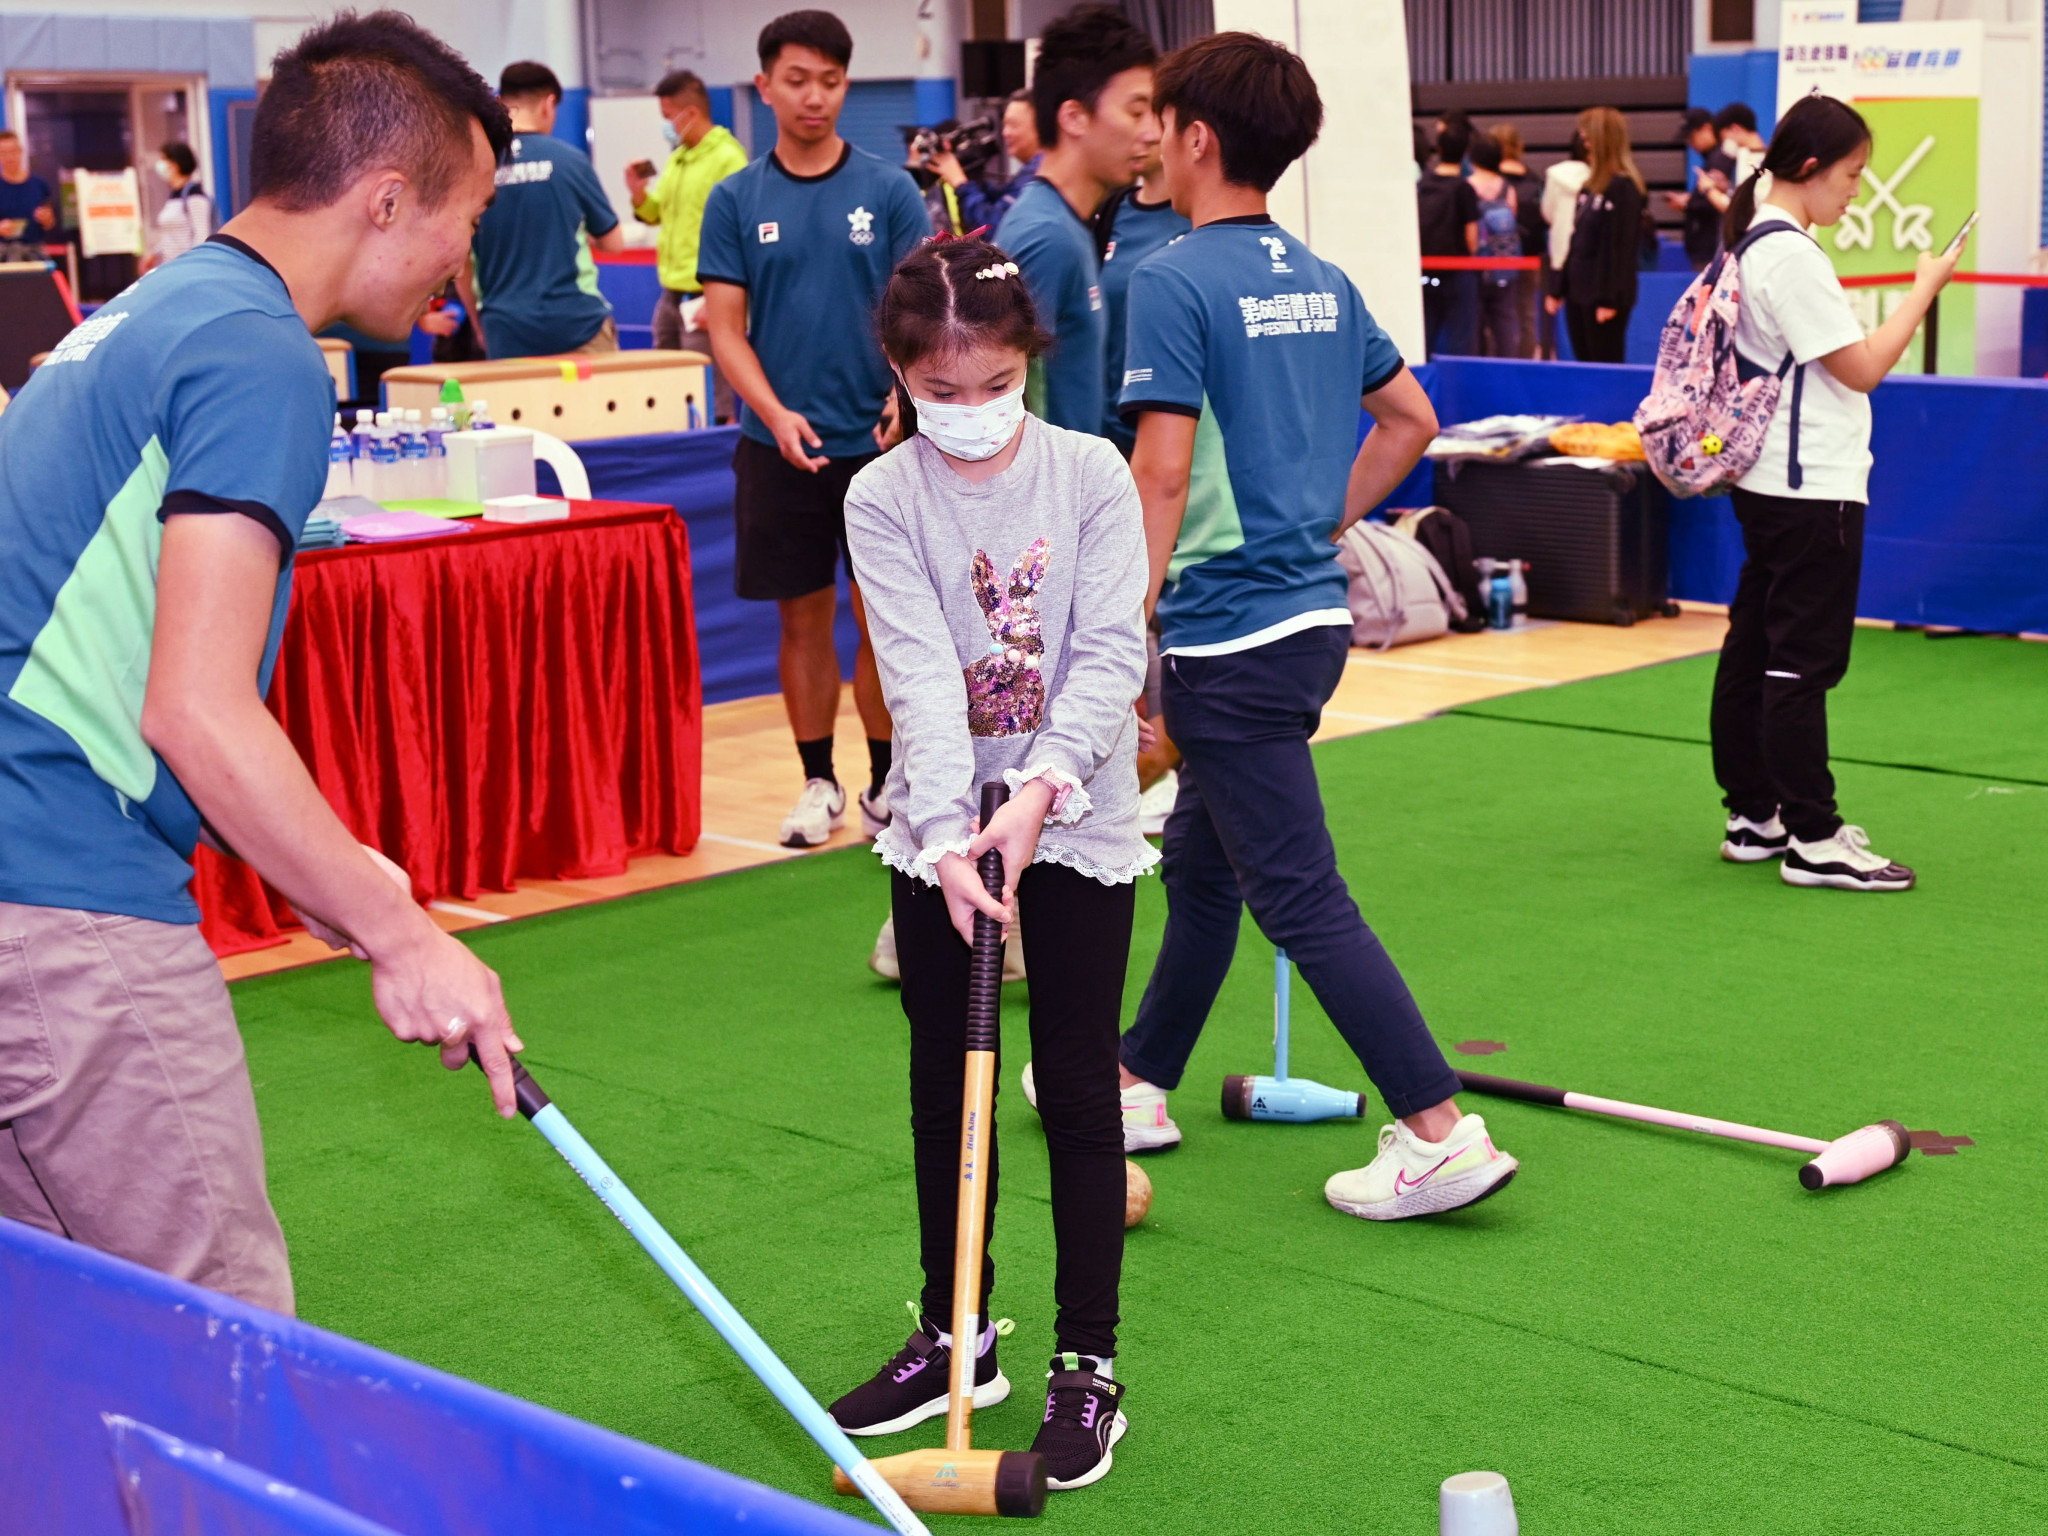 Children are set to get the chance to participate in a series of activities as part of the 66th Festival of Sport organised by the Sports Federation & Olympic Committee of Hong Kong, China ©SF&OC